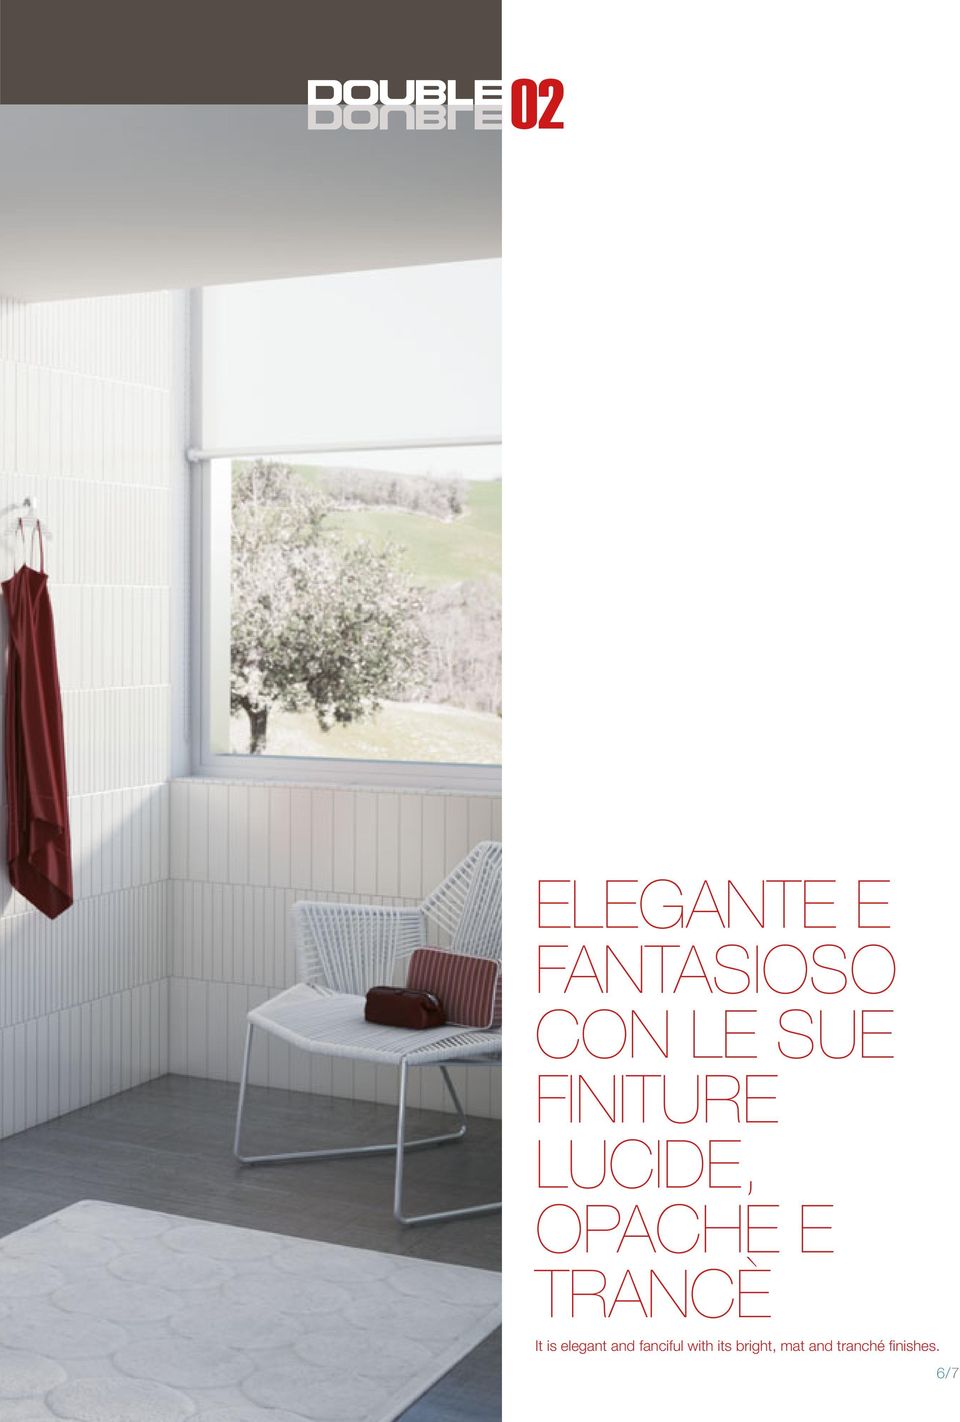 TRANCÈ It is elegant and fanciful with